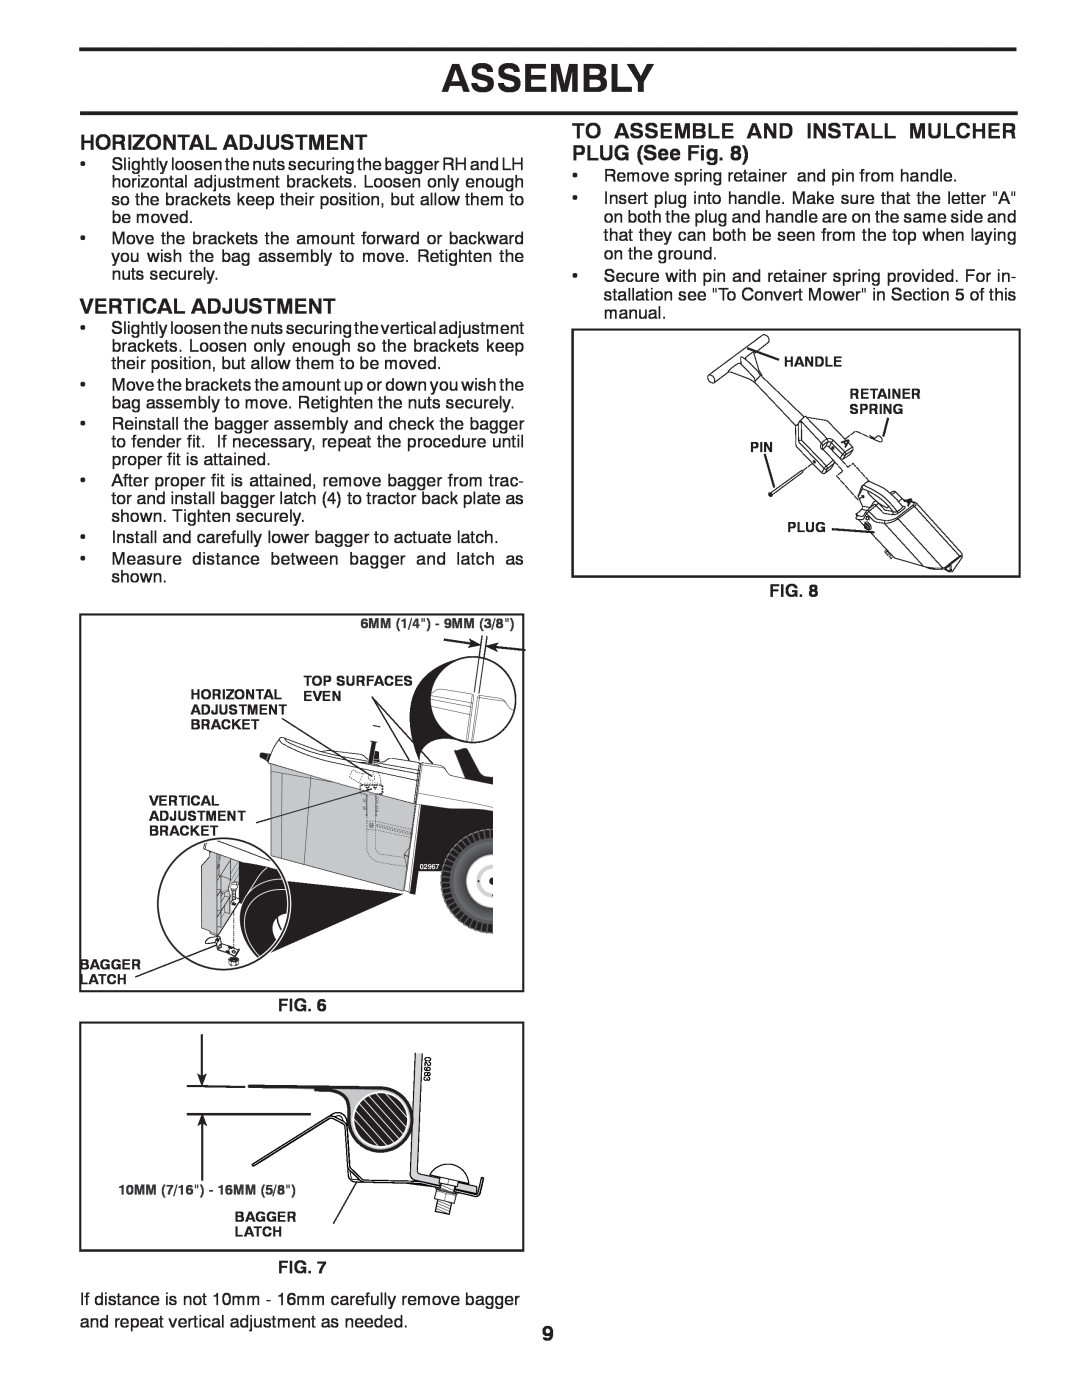 Husqvarna CTH2036 Horizontal Adjustment, Vertical Adjustment, TO ASSEMBLE AND INSTALL MULCHER PLUG See Fig, Assembly 